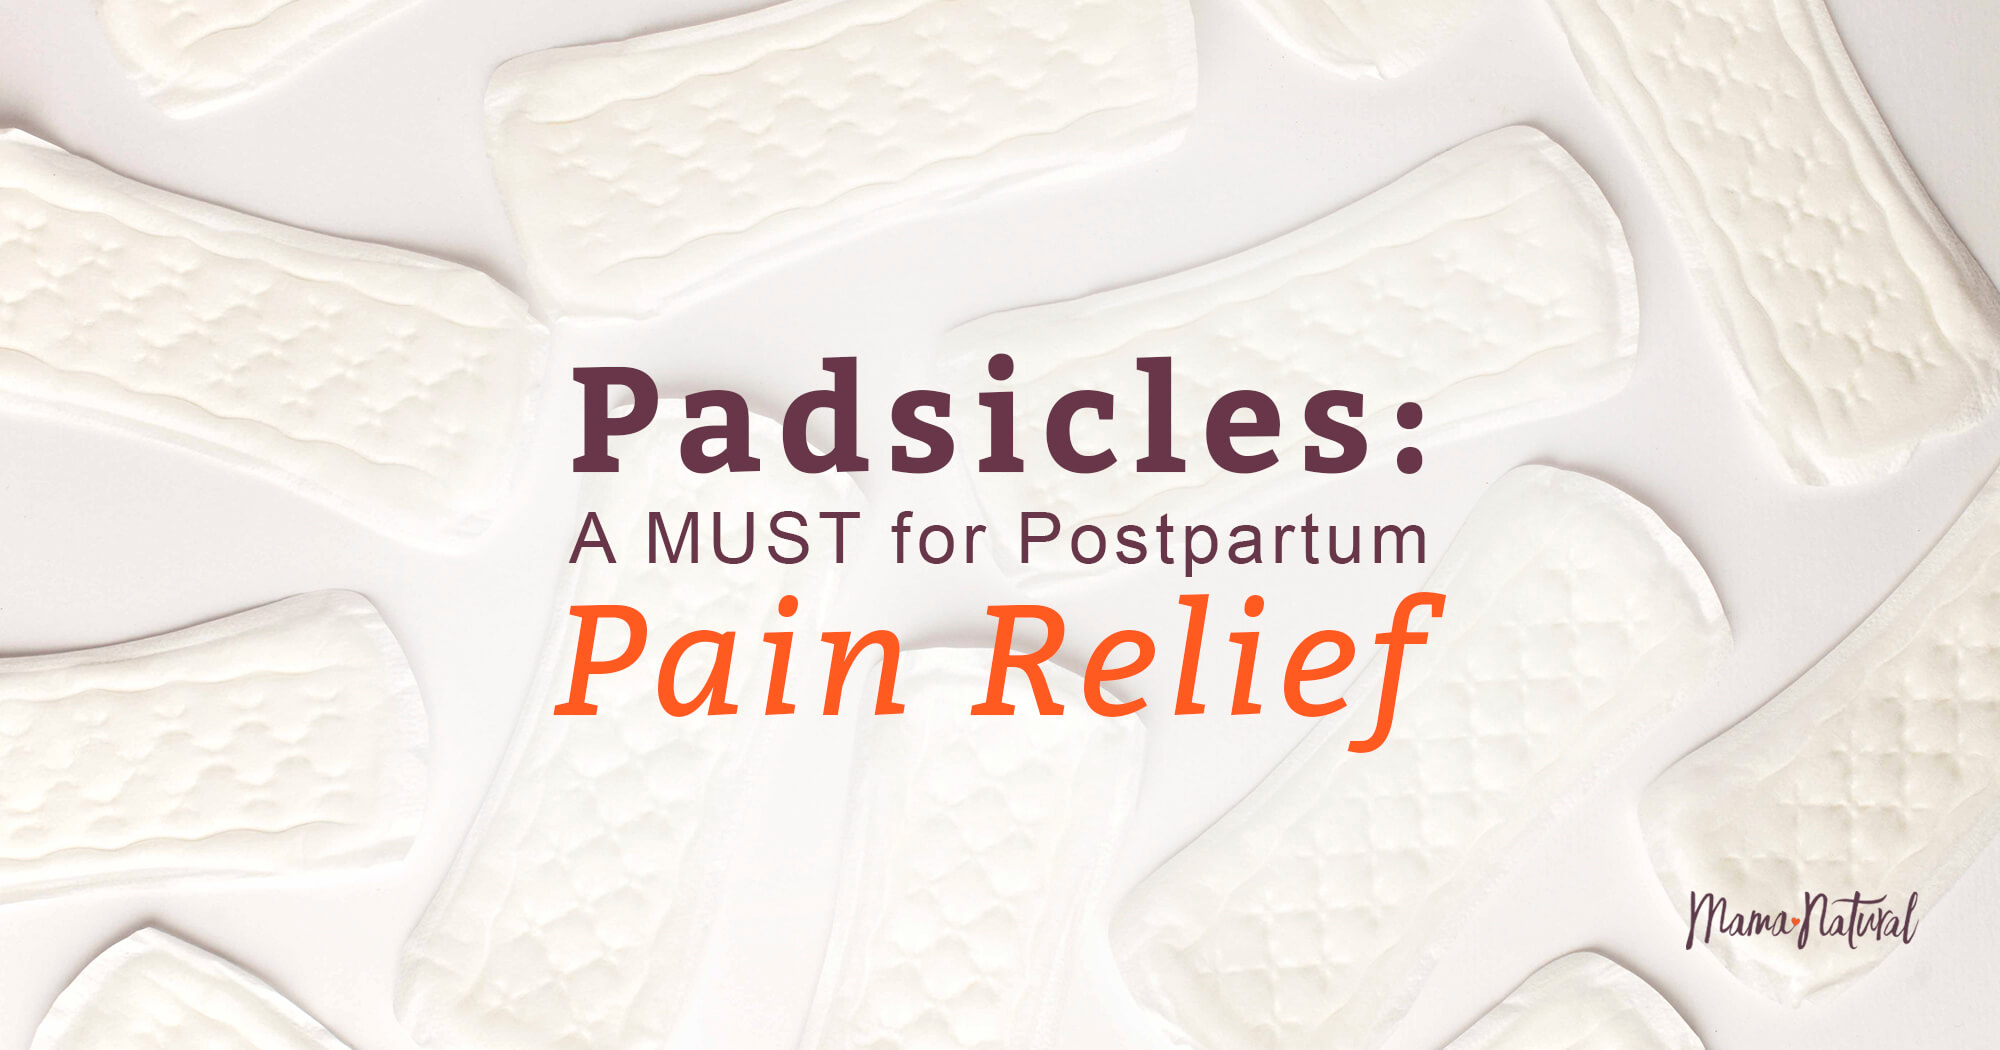 https://www.mamanatural.com/wp-content/uploads/Padsicles-A-MUST-for-Postpartum-Pain-Relief-for-you-post-by-Mama-Natural-Facebook.jpg